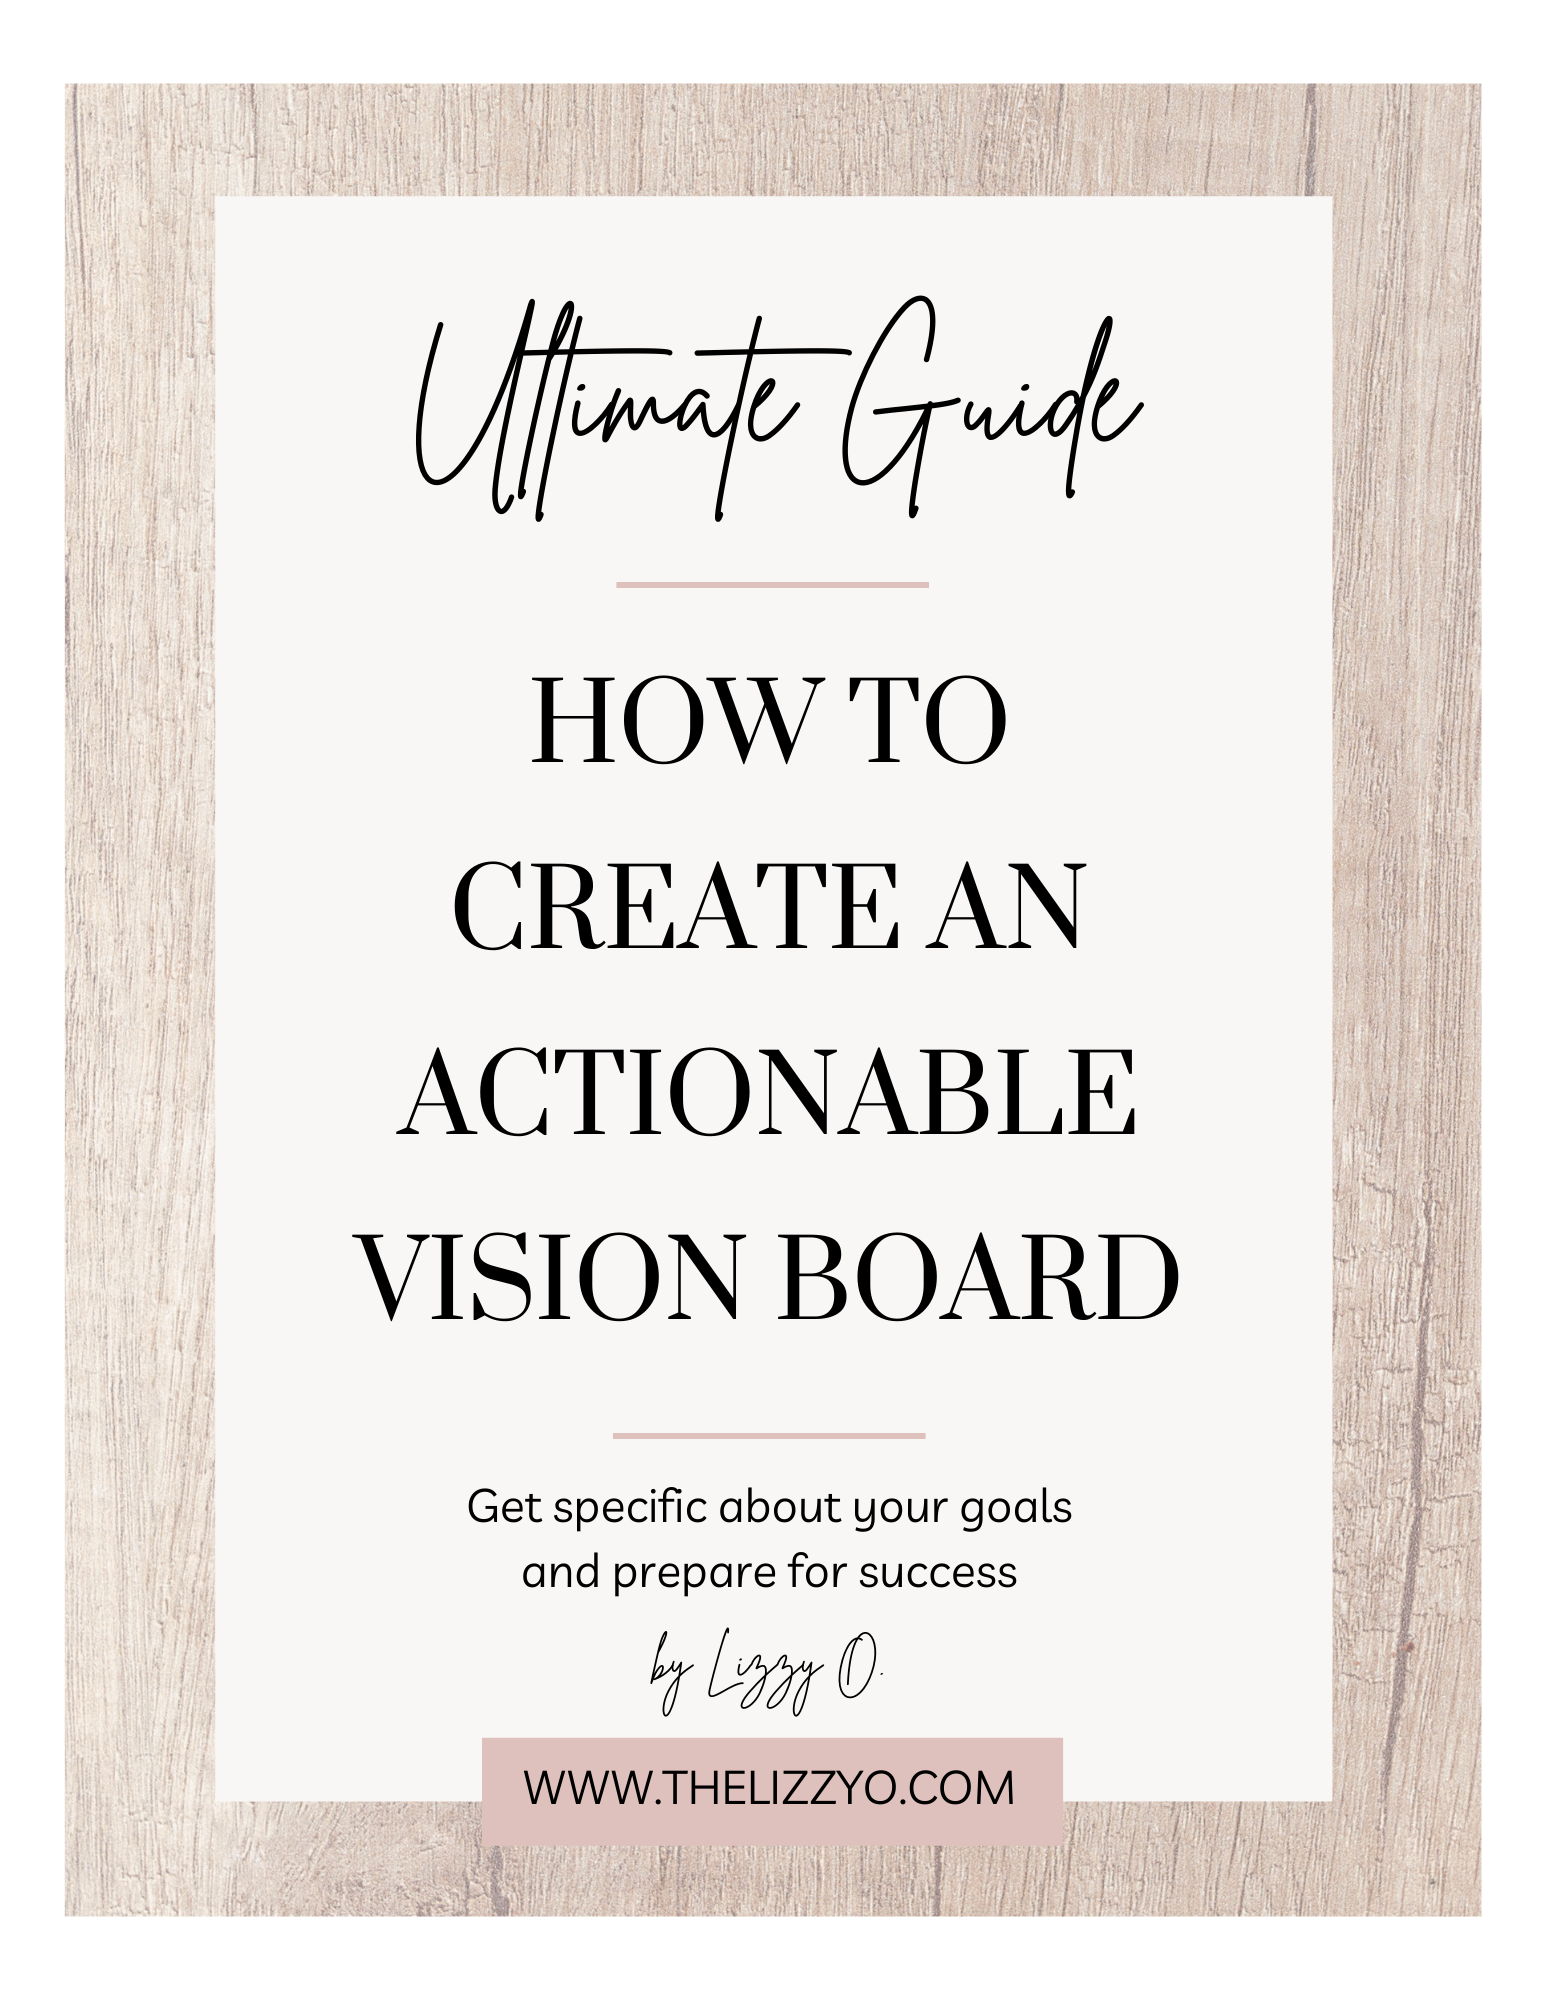 The Ultimate Vision Board Images Guide (Where to Find Pictures